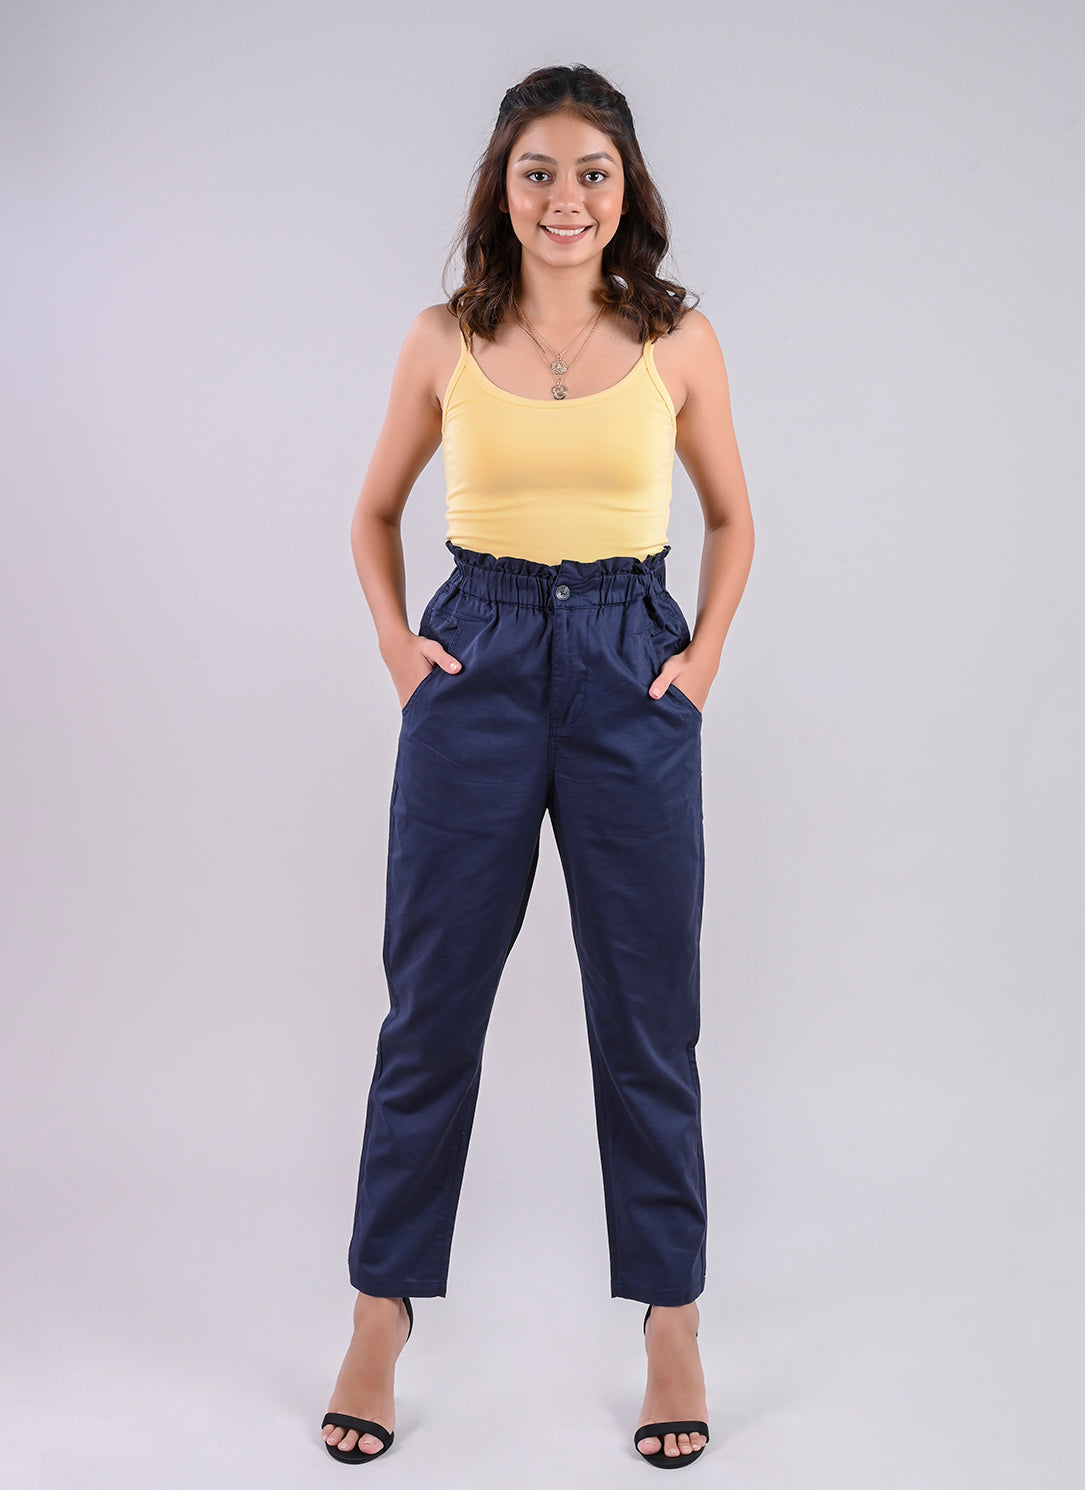 BREEZY PANTS IN NAVY WITH PAPERBAG WAIST